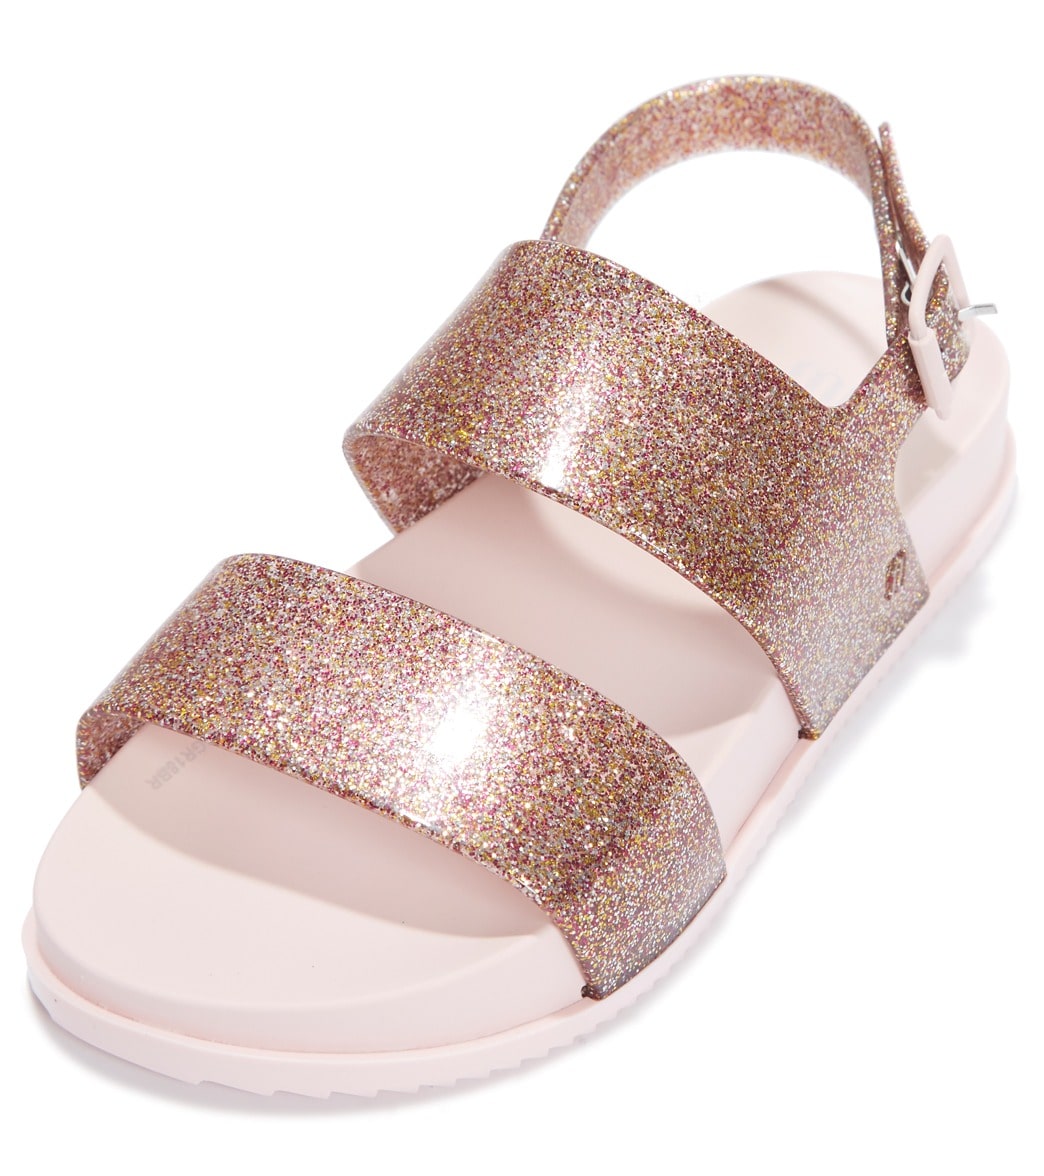 Mel By Melissa Mel Cosmic Sandals - Glossy Pink 12 Pvc - Swimoutlet.com